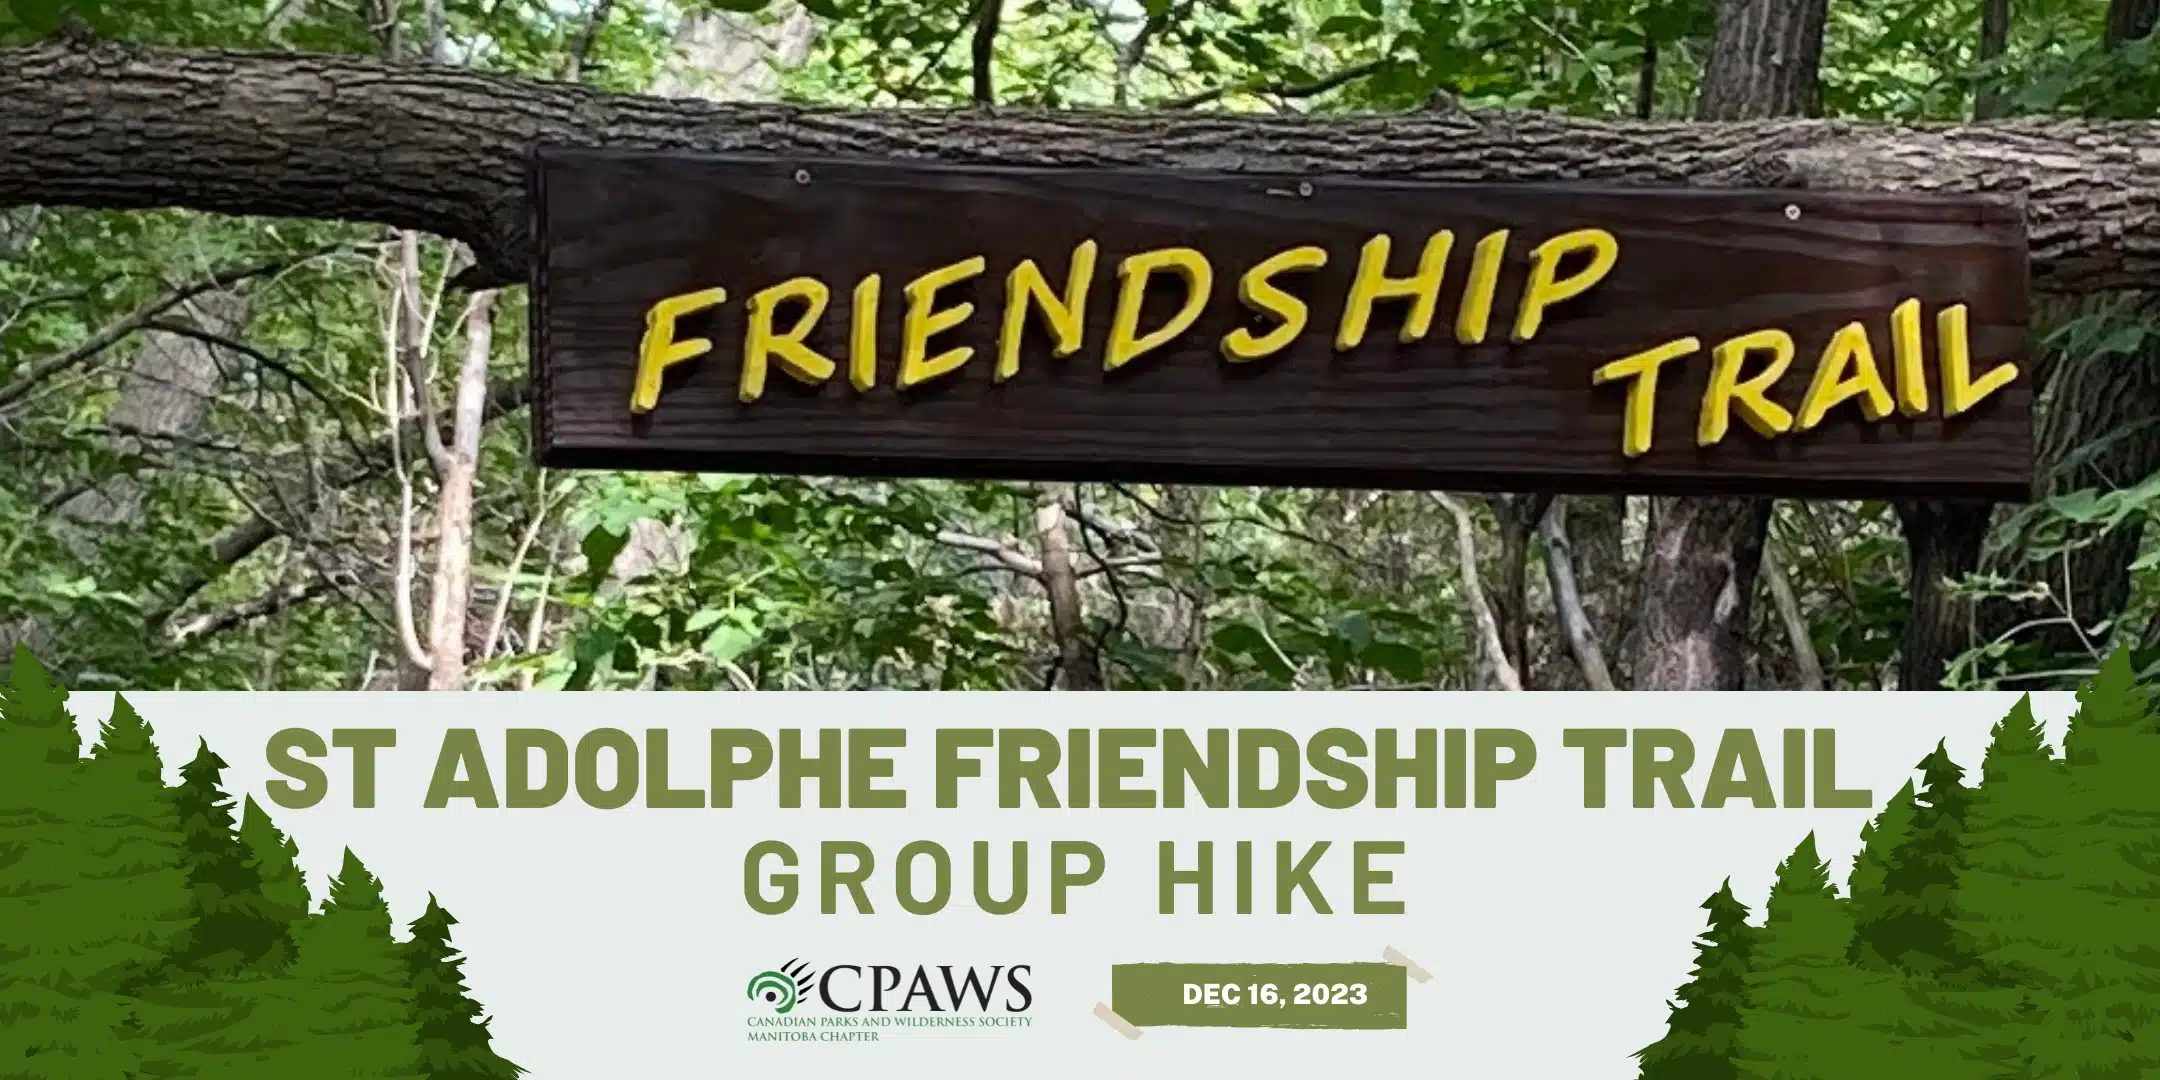 Banner for the EventBrite and WordPress posts for Group Hike on the St Adolphe Friendship Trail on Dec 16, 2023.